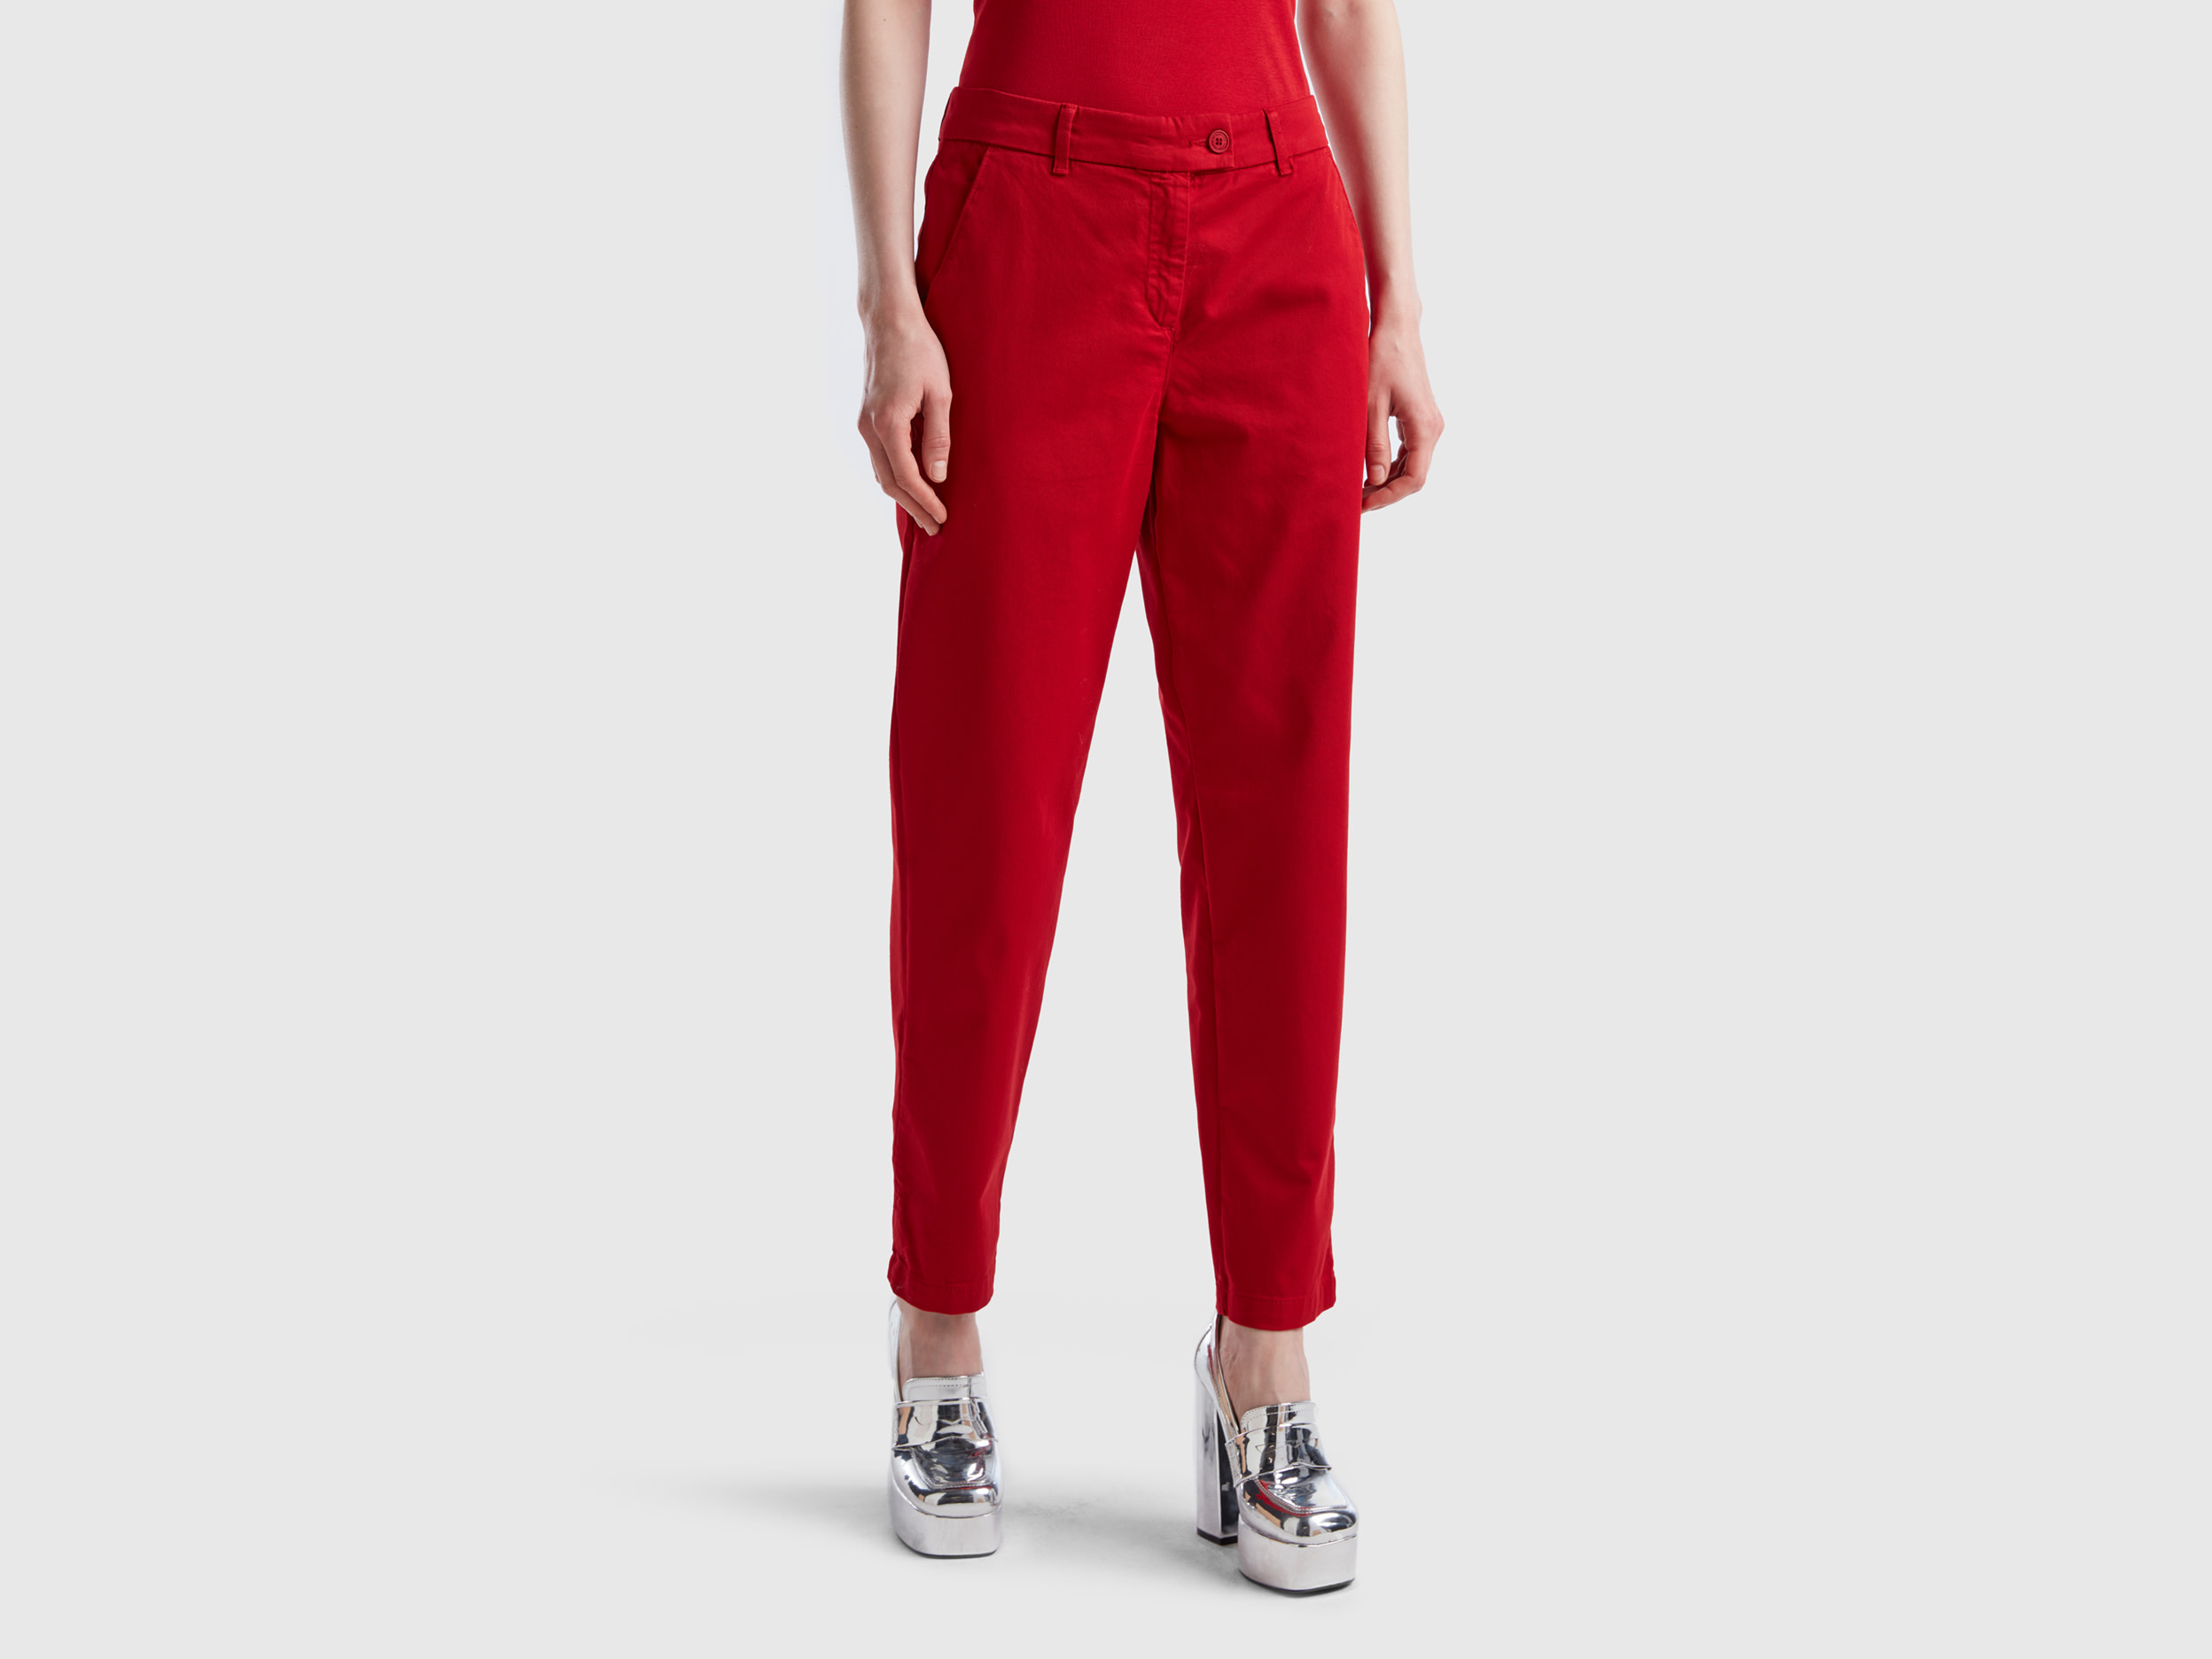 Benetton, Stretch Cotton Chino Trousers, size 6, Red, Women